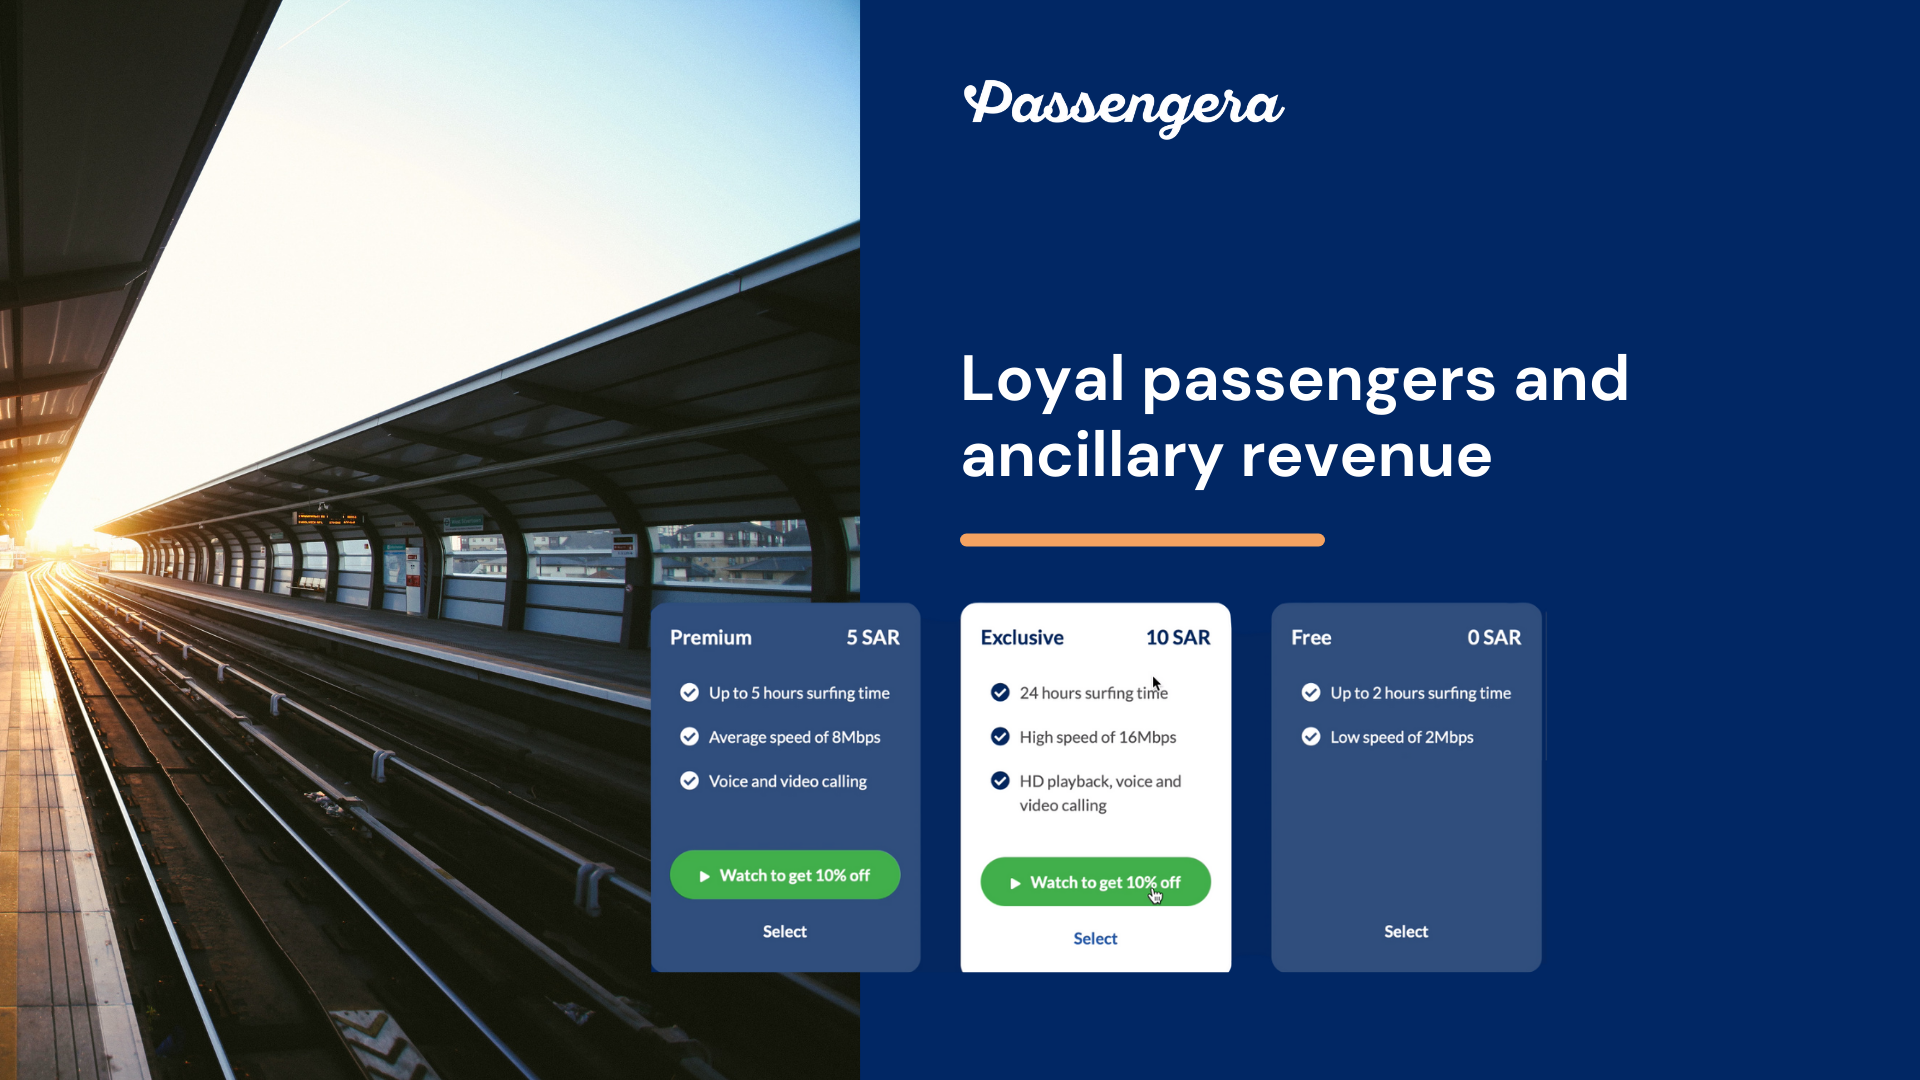 Loyal passengers and ancillary revenue. The benefits of connectivity and infotainment for transport operators